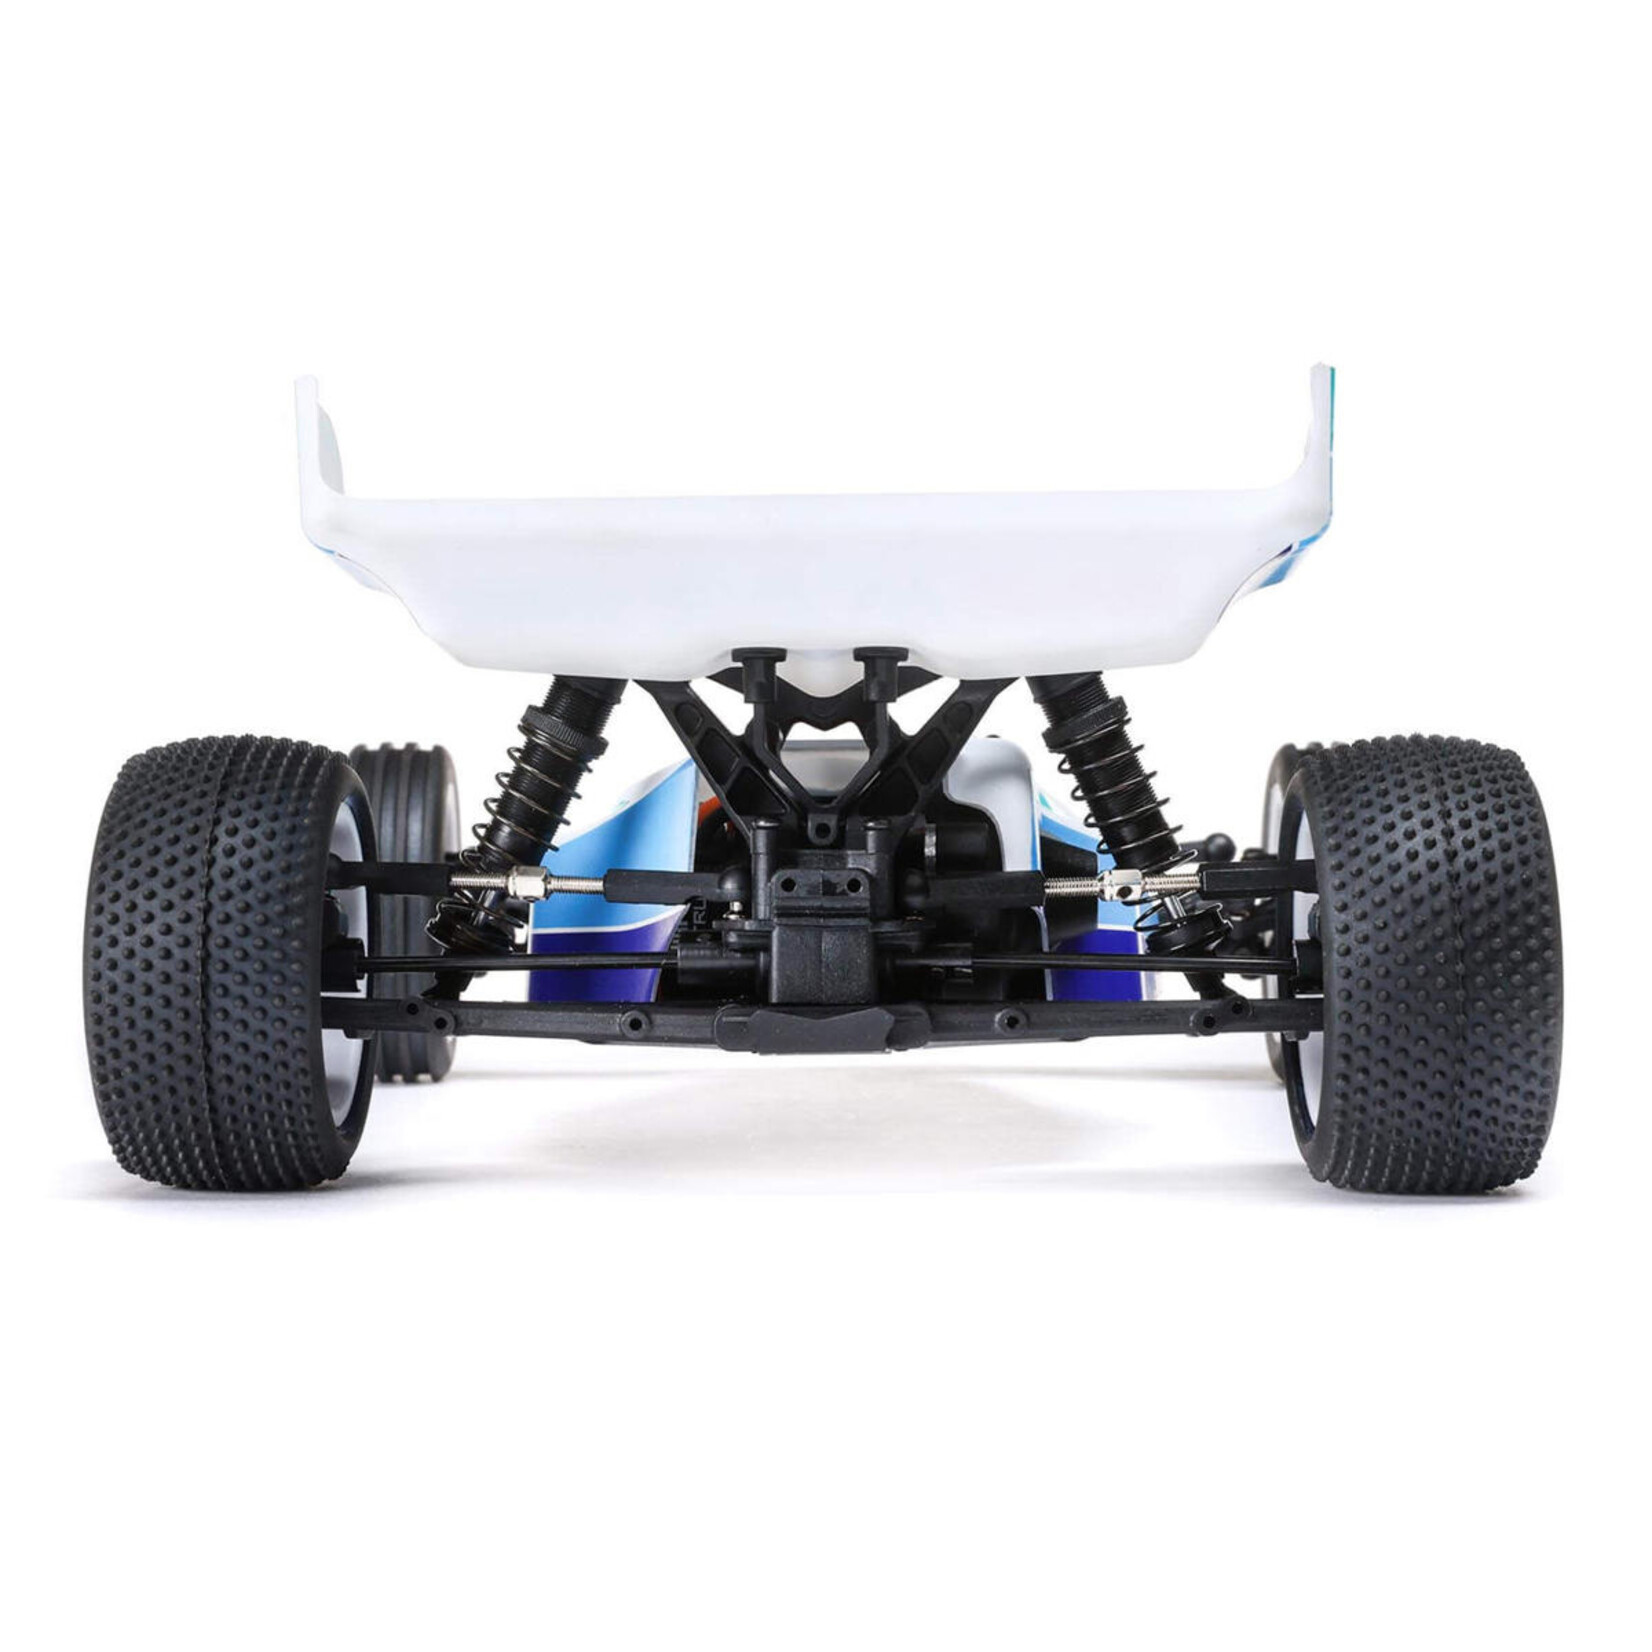 Losi Losi Mini-B 1/16 RTR Brushless 2WD Buggy (Blue) w/2.4GHz Radio, Battery & Charger #LOS01024T2